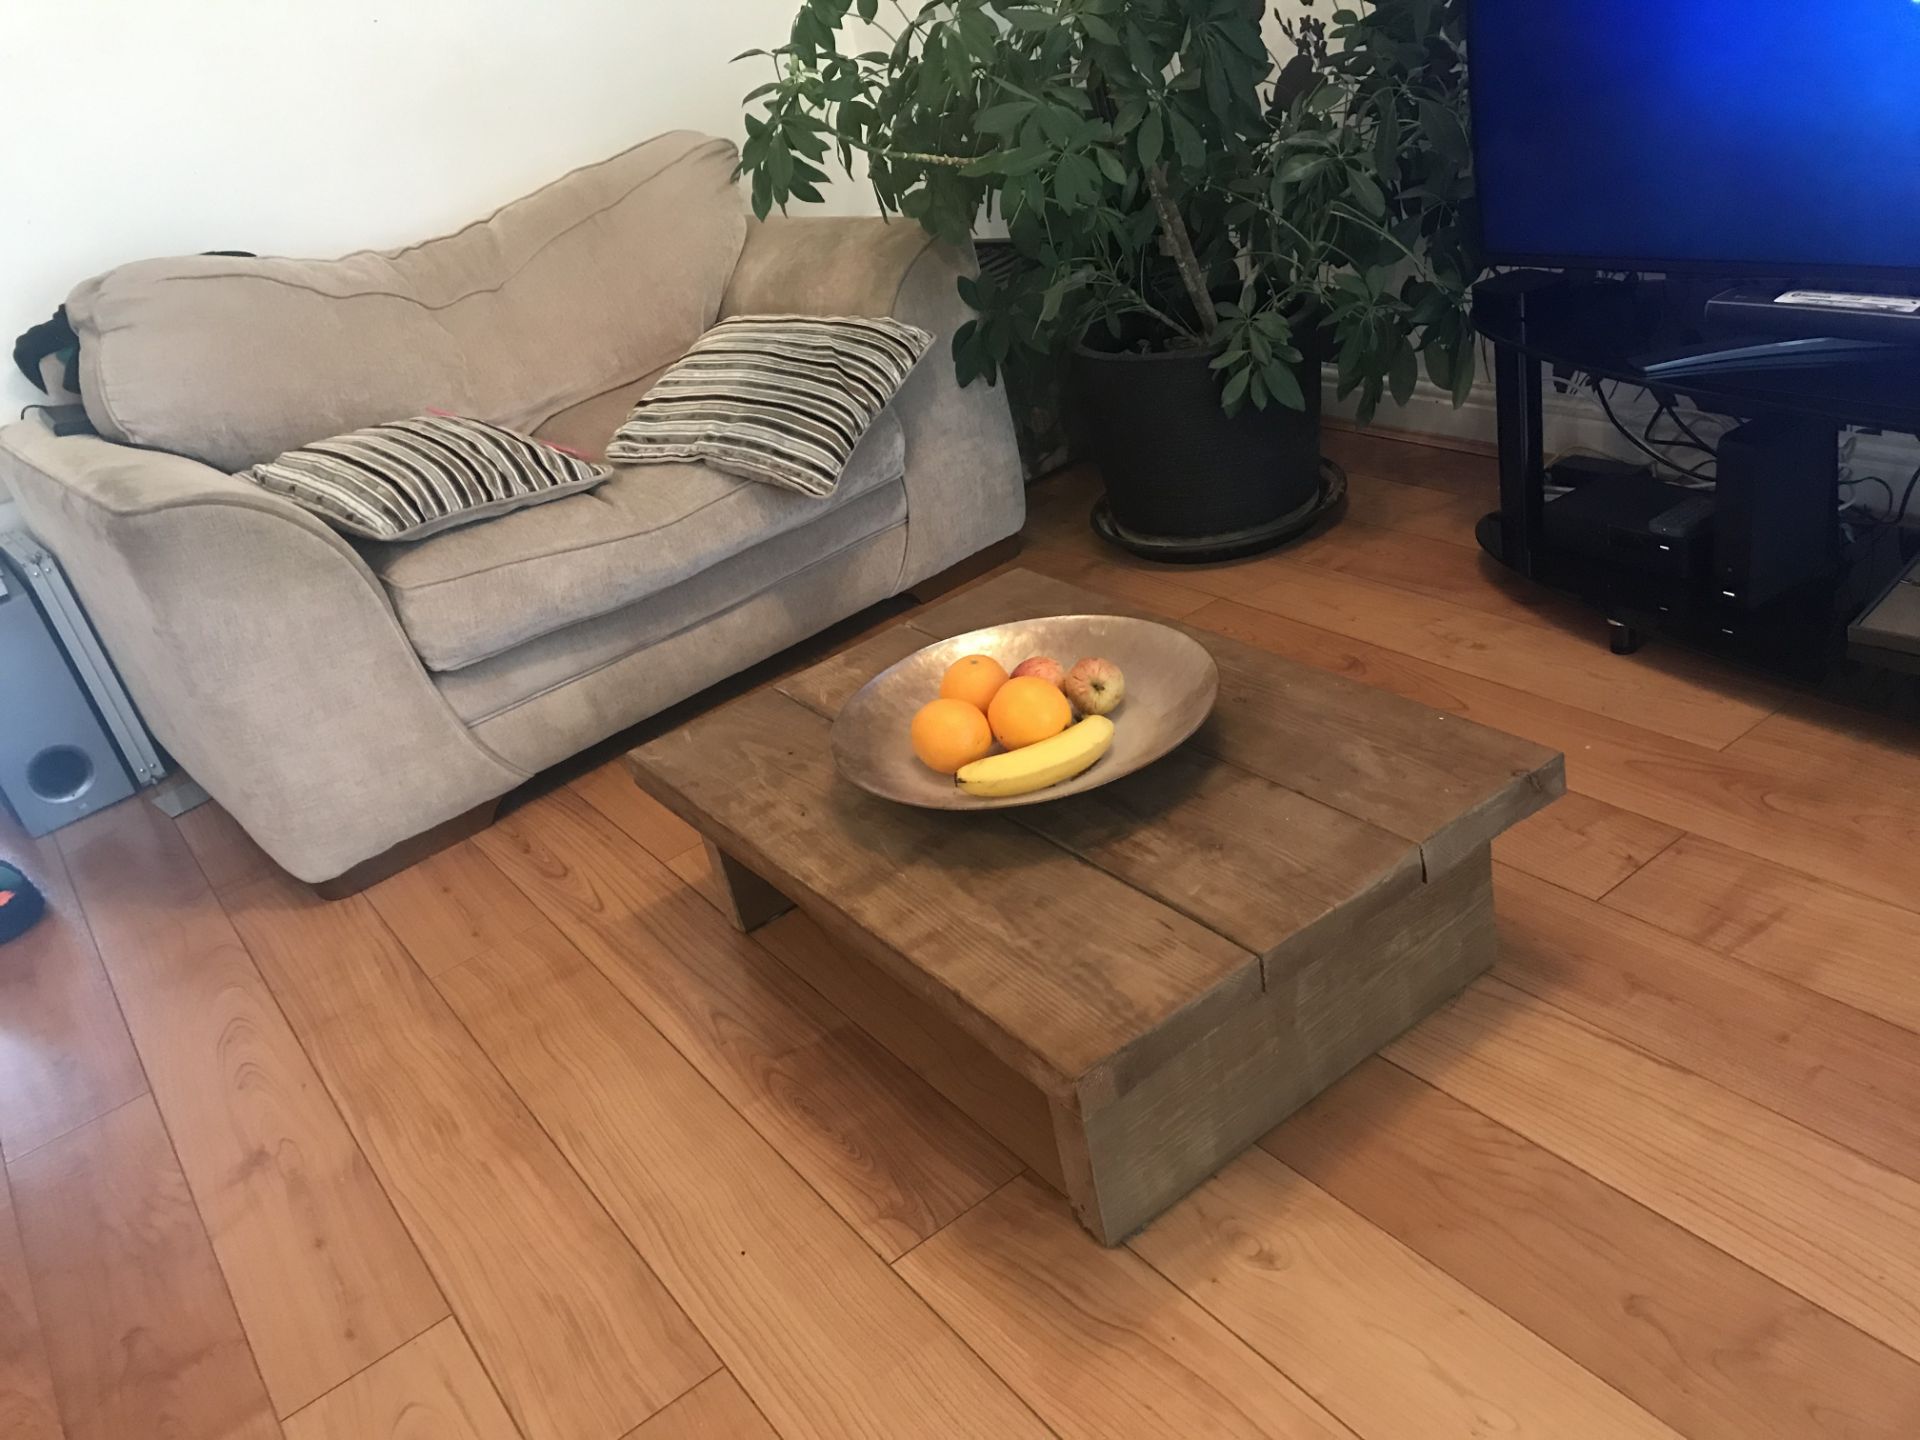 4x Rustic Chunky Distressed wood Coffee Table - Image 4 of 4